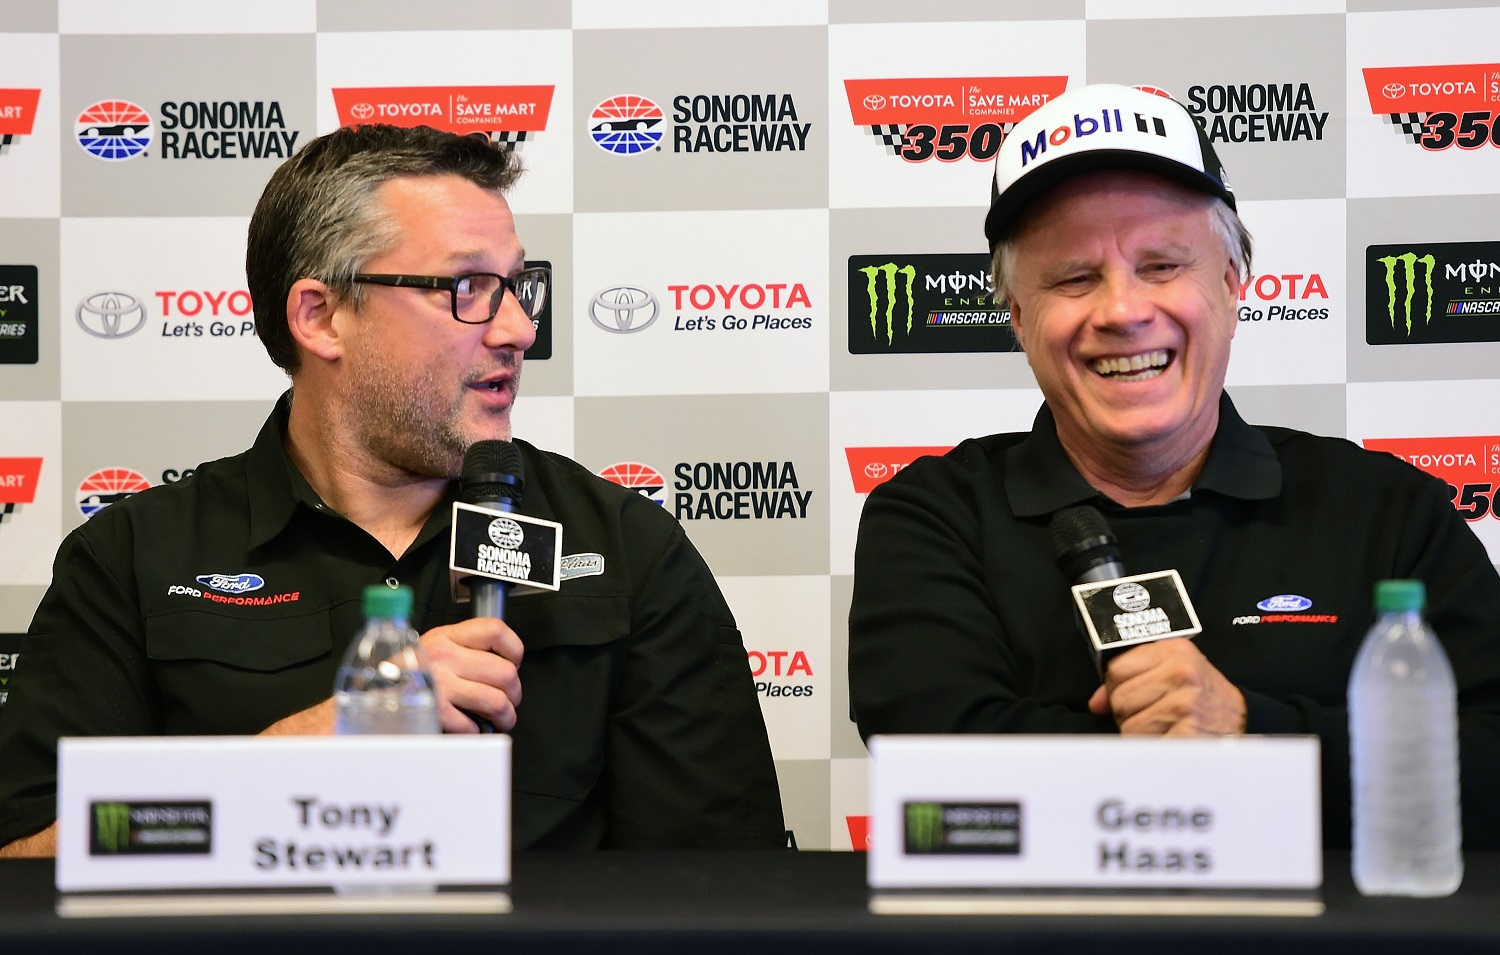 Tony Stewart and Gene Haas talk to the media after the Monster Energy NASCAR Cup Series Toyota/Save Mart 350 at Sonoma Raceway on June 25, 2017. | Jared C. Tilton/Getty Images